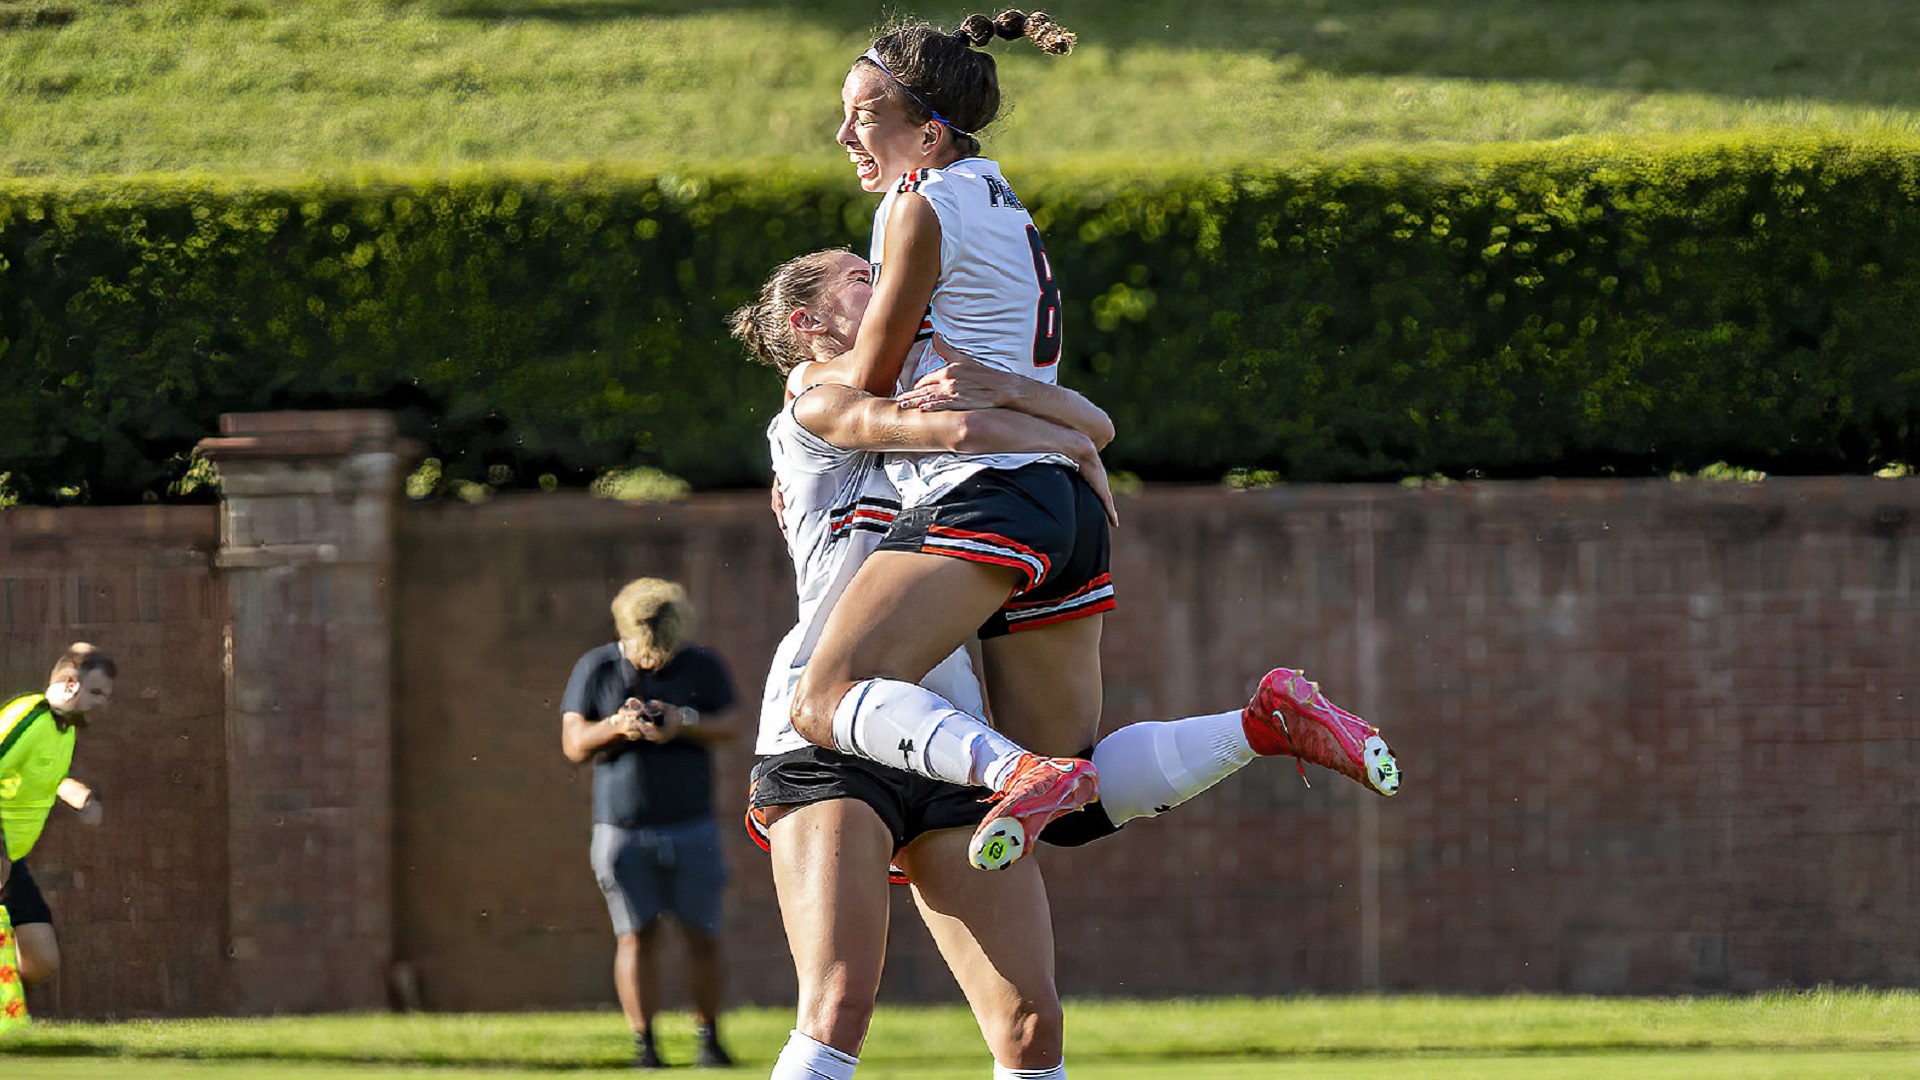 Lakin Pennington leaps in the arms of Sydney Grant after scoring in the first half for a 2-0 Pioneer lead (photo by Chuck Williams)